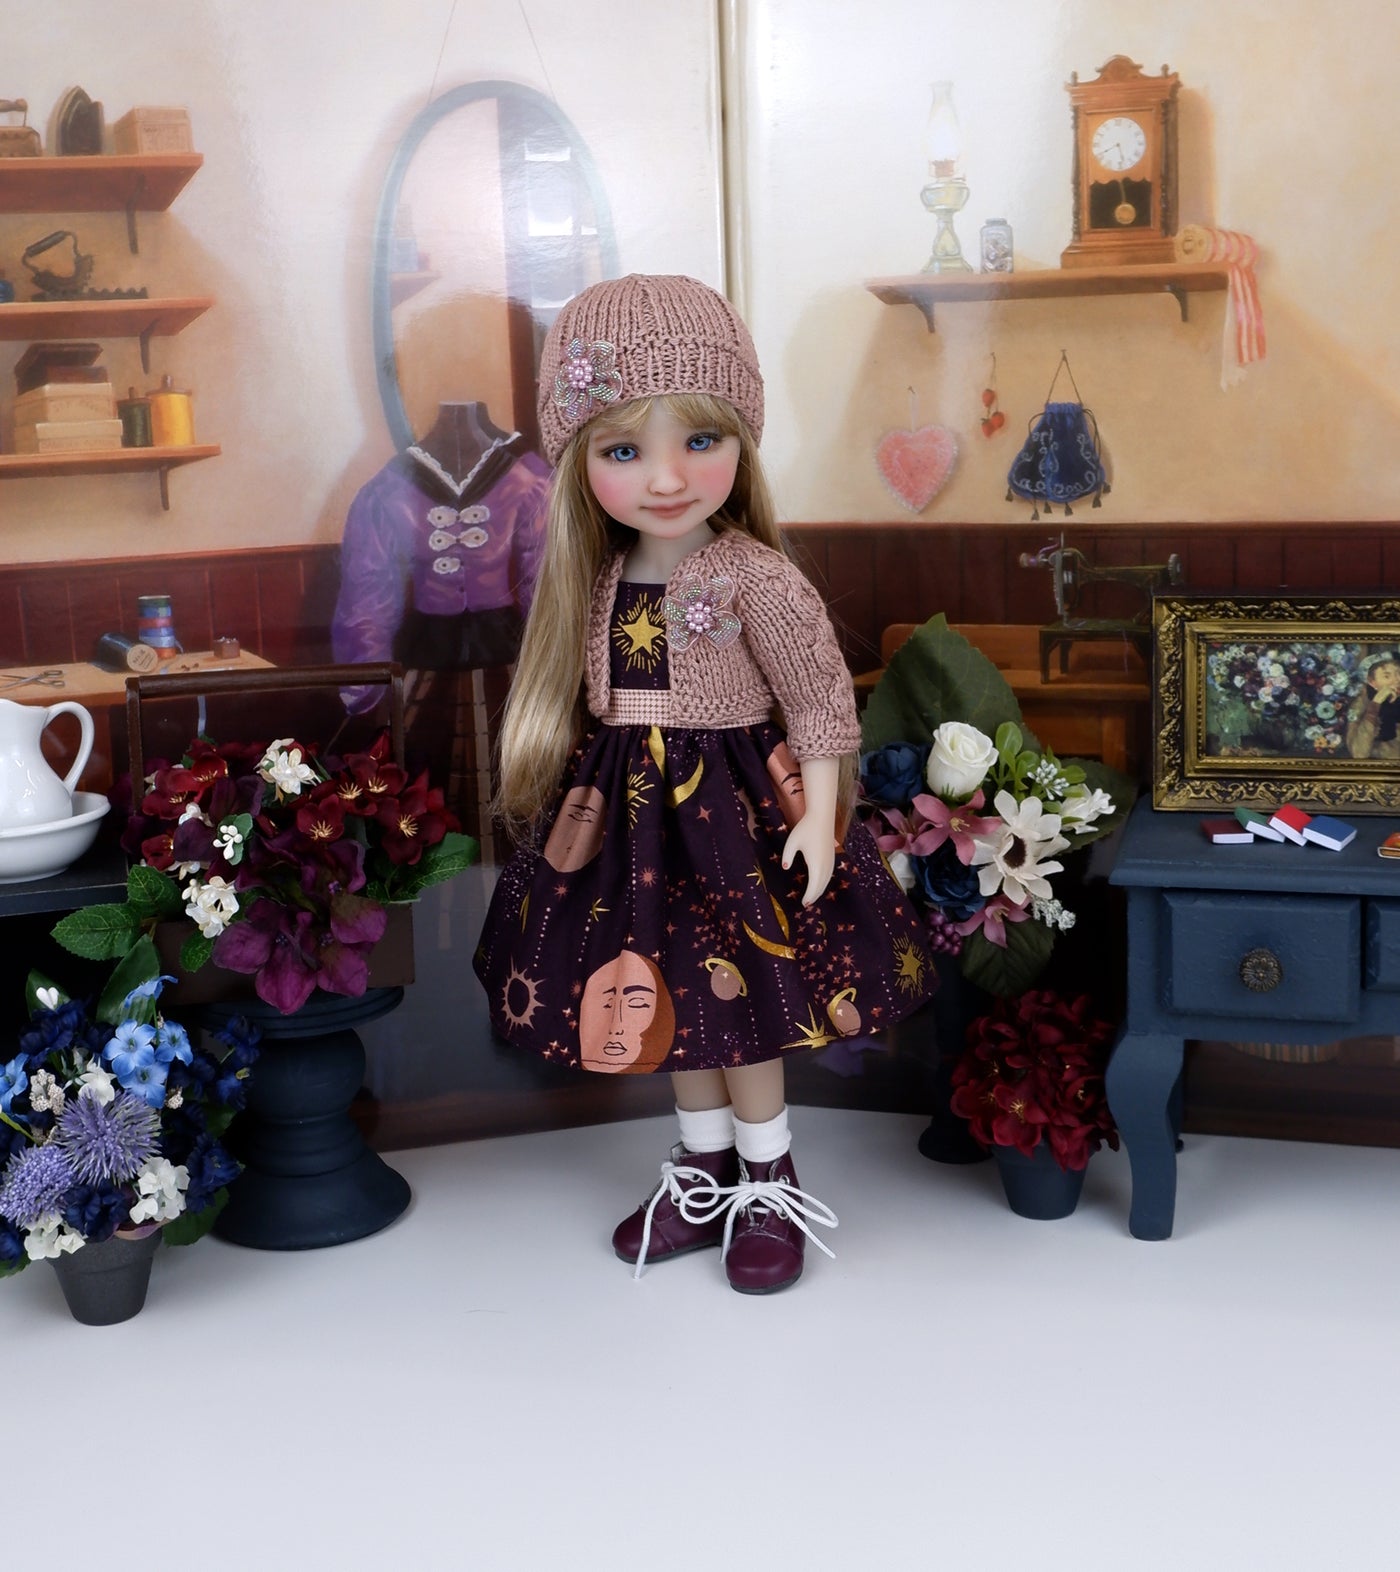 Celestial Beauty - dress and sweater set with boots for Ruby Red Fashion Friends doll